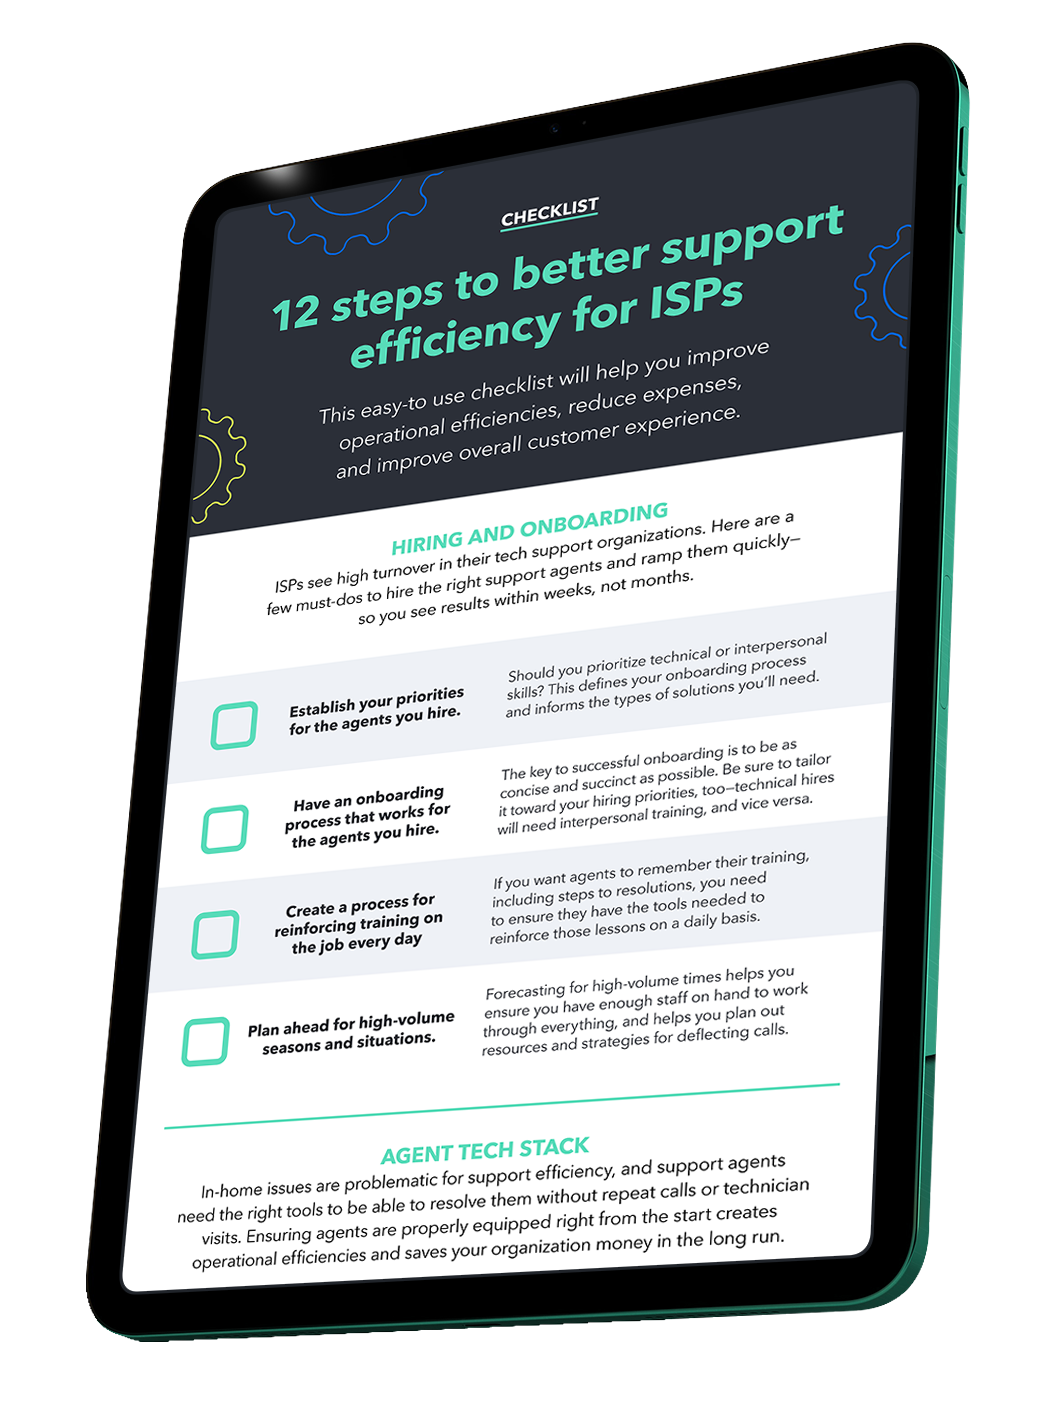 Checklist: 12 steps to better support efficiency